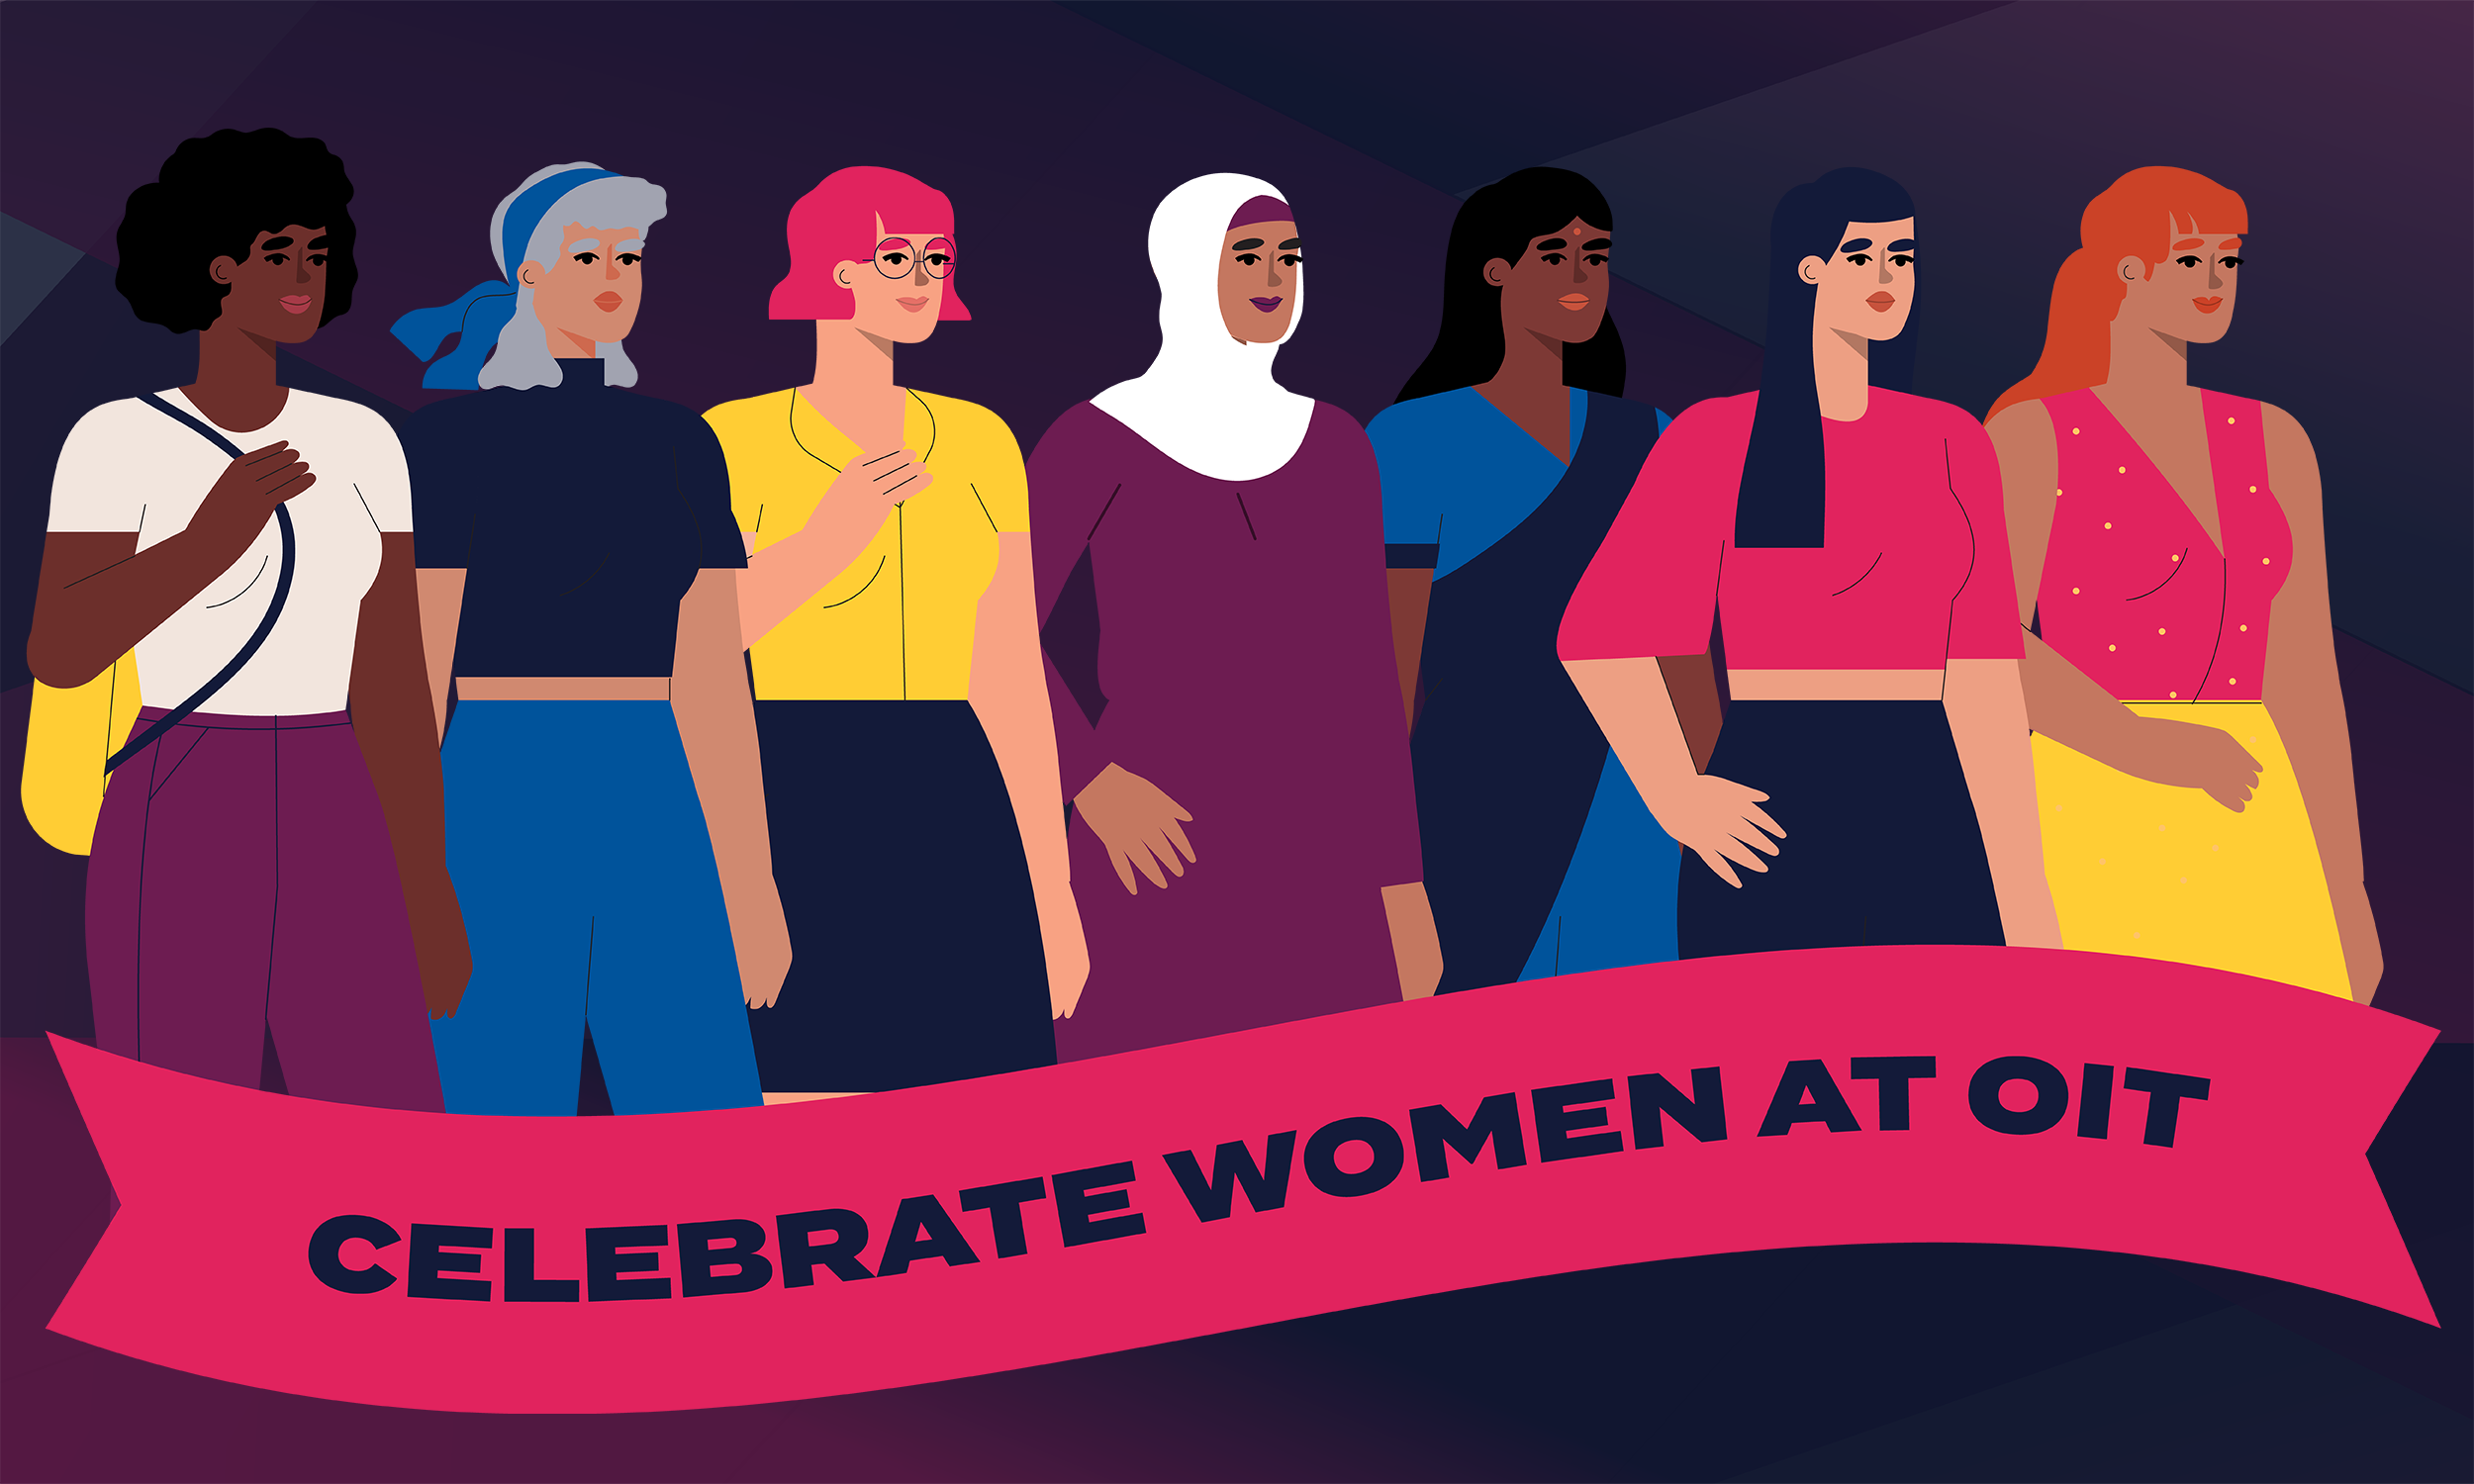 Graphic of six women of various races and ethnicities standing shoulder to shoulder above a banner reading "Celebrate Women at OIT"